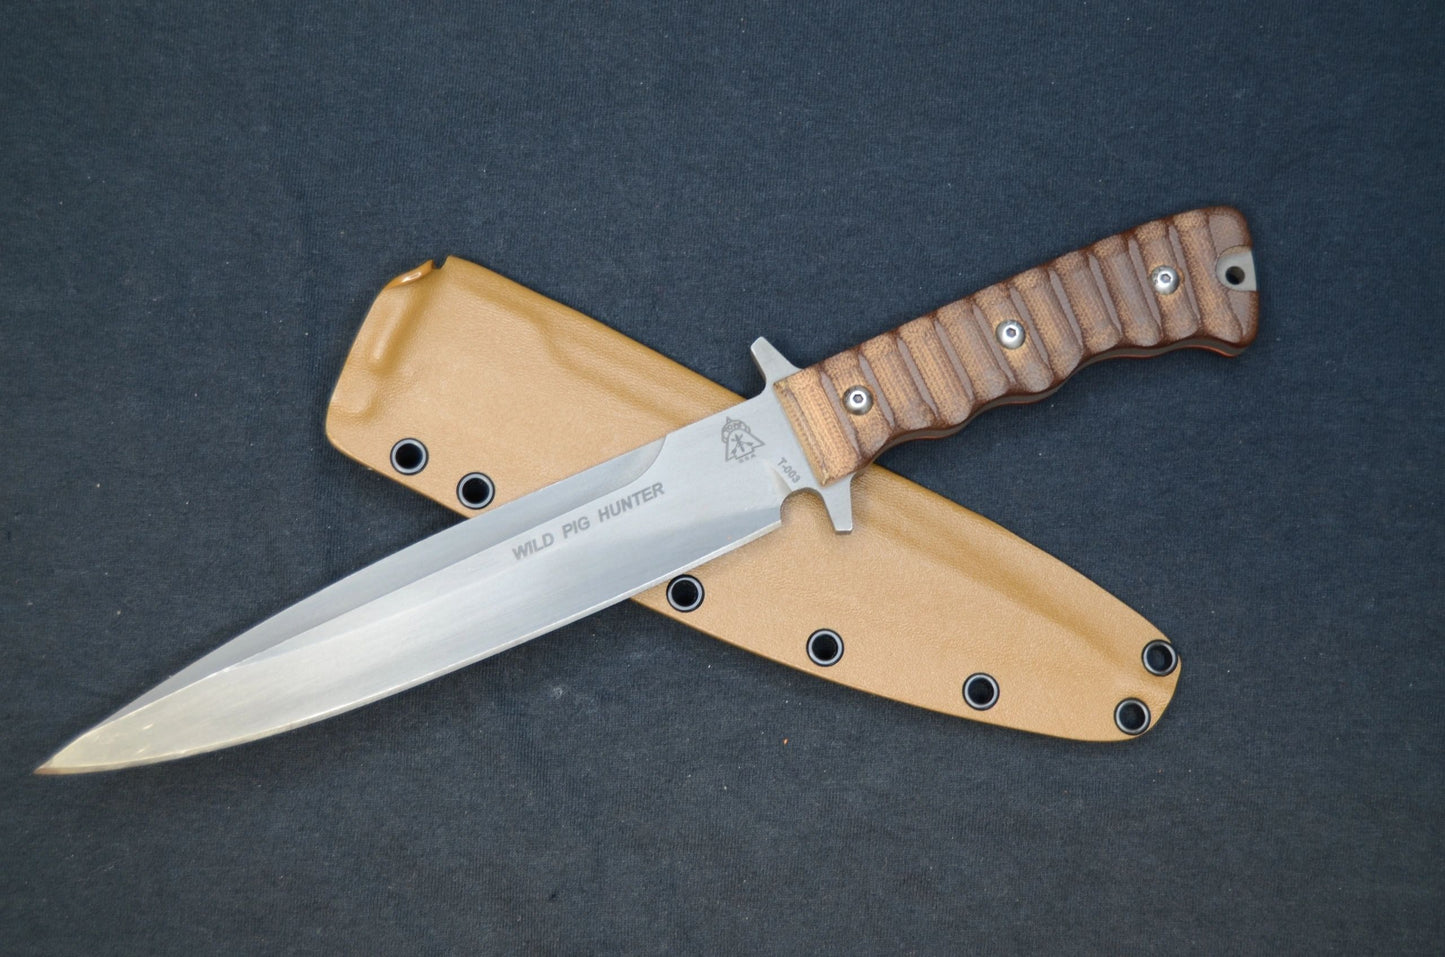 TOPS KNIVES WILD PIG HUNTER ( WPH ) FOLD OVER COYOTE BROWN CUSTOM KYDEX SHEATH BY RED HILL SHEATHS